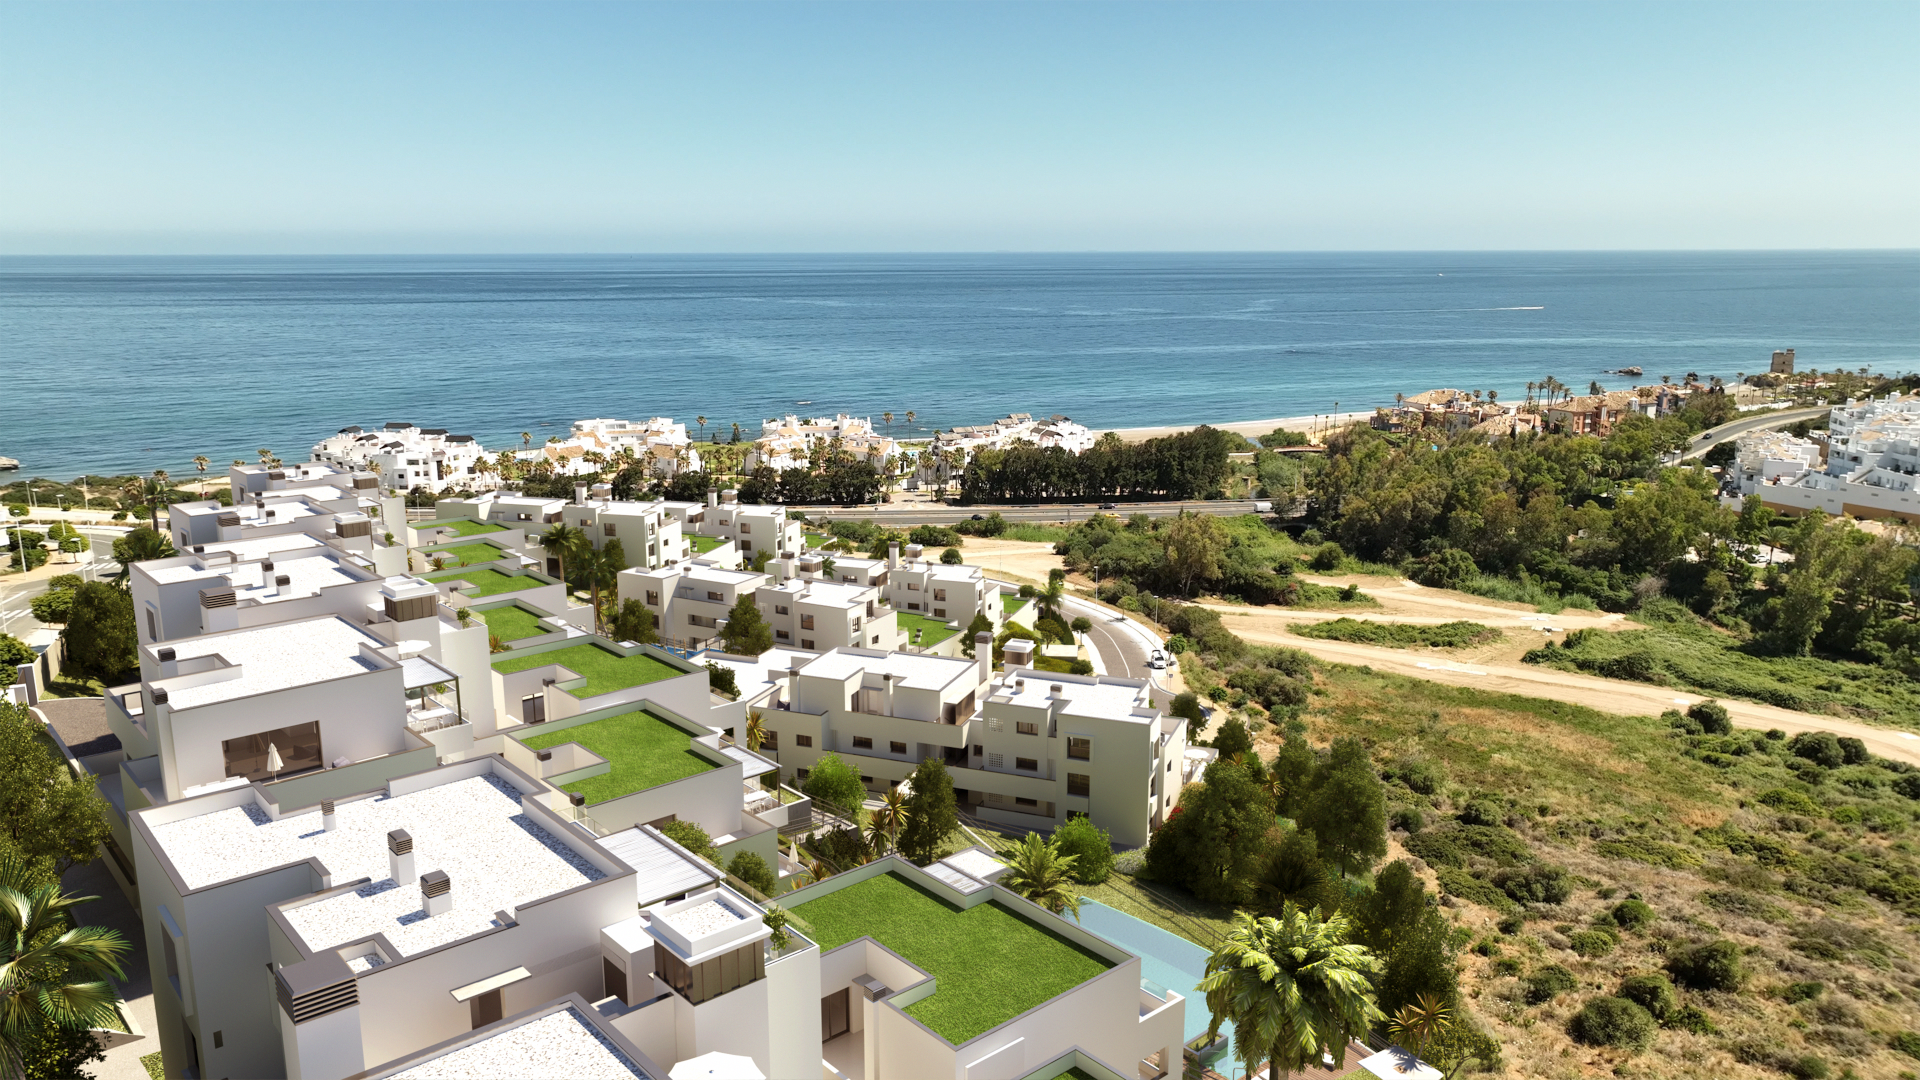 Exclusive beach complex of apartments and penthouses for sale in Casares-Estepona